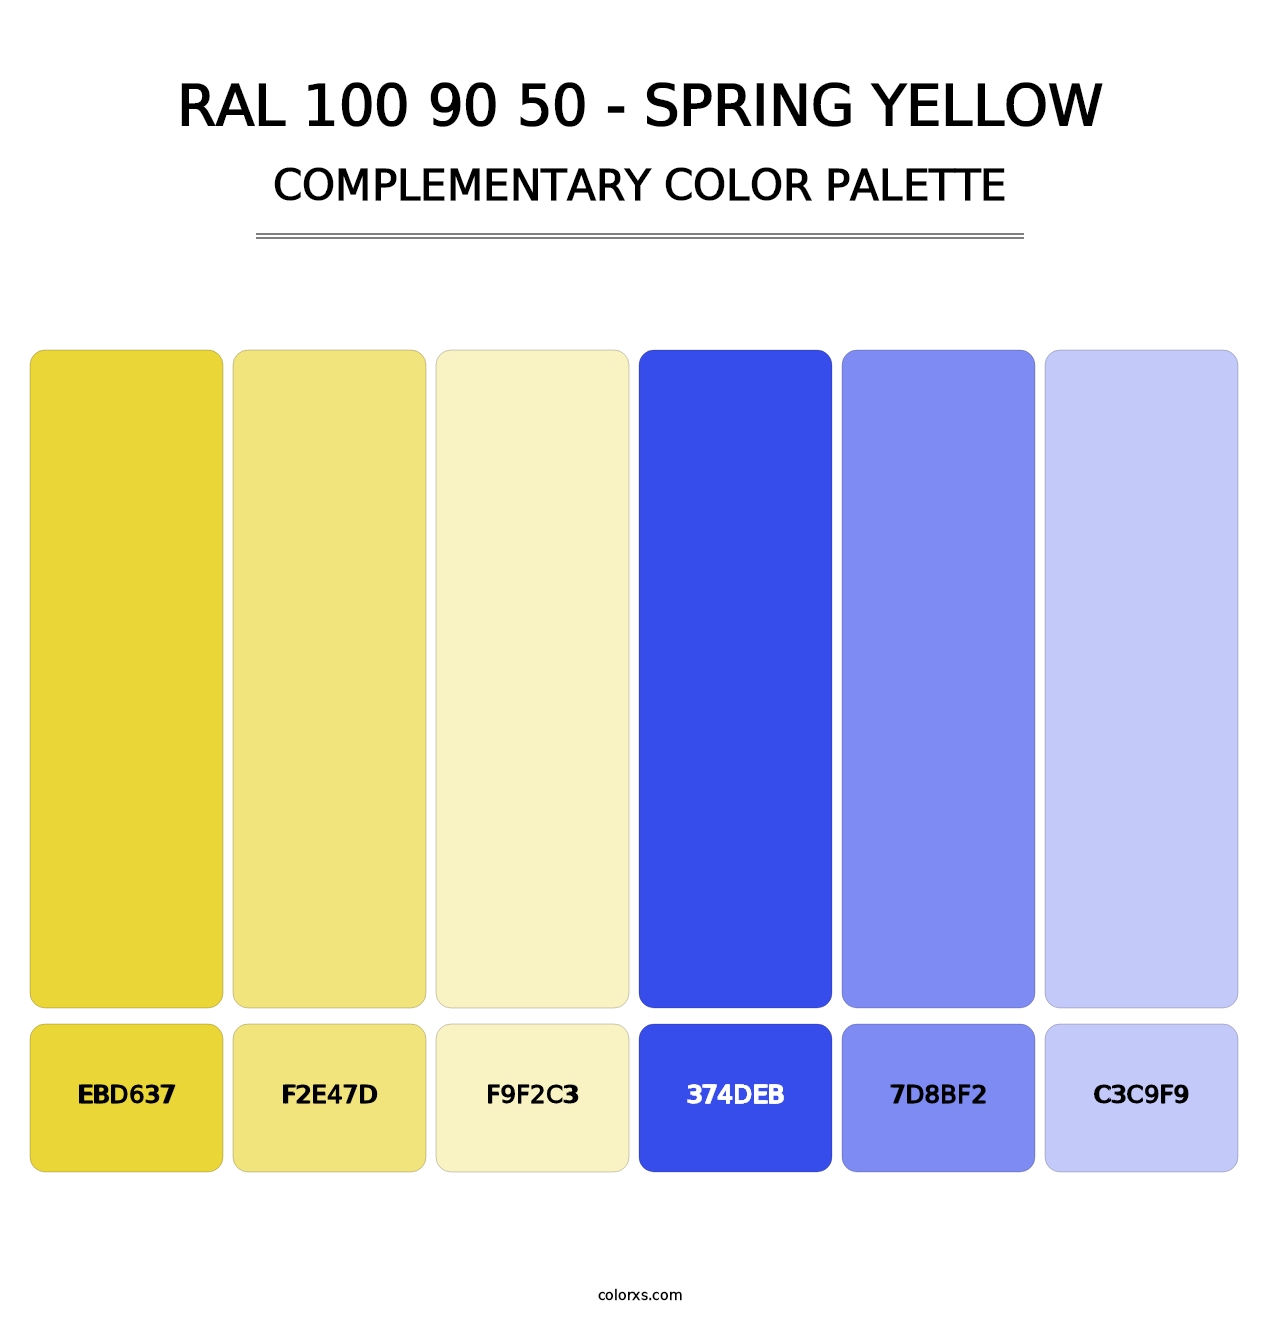 RAL 100 90 50 - Spring Yellow - Complementary Color Palette